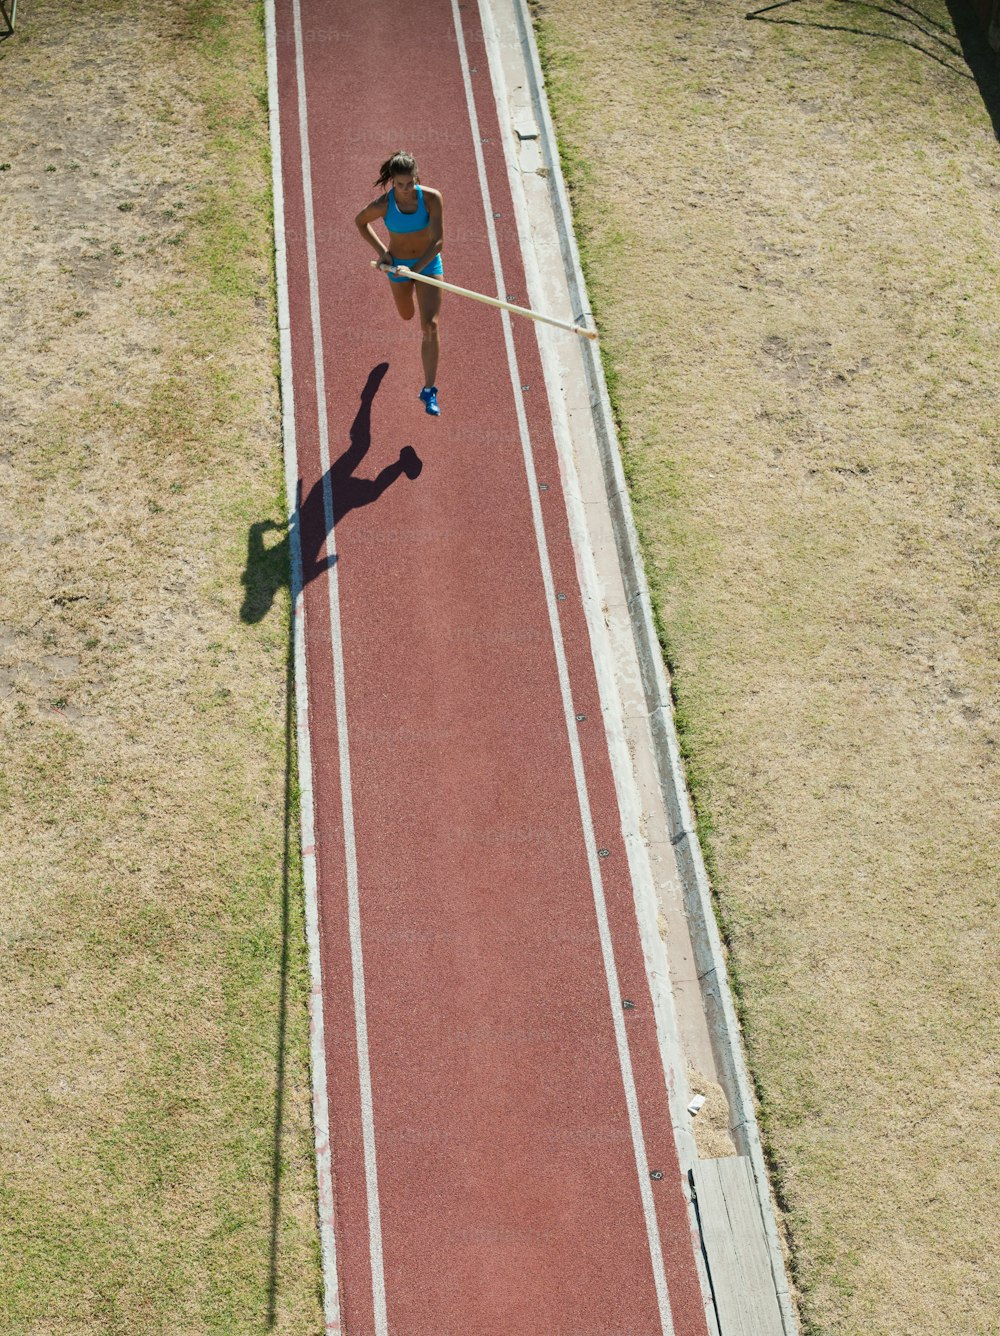 a man is running on a red track